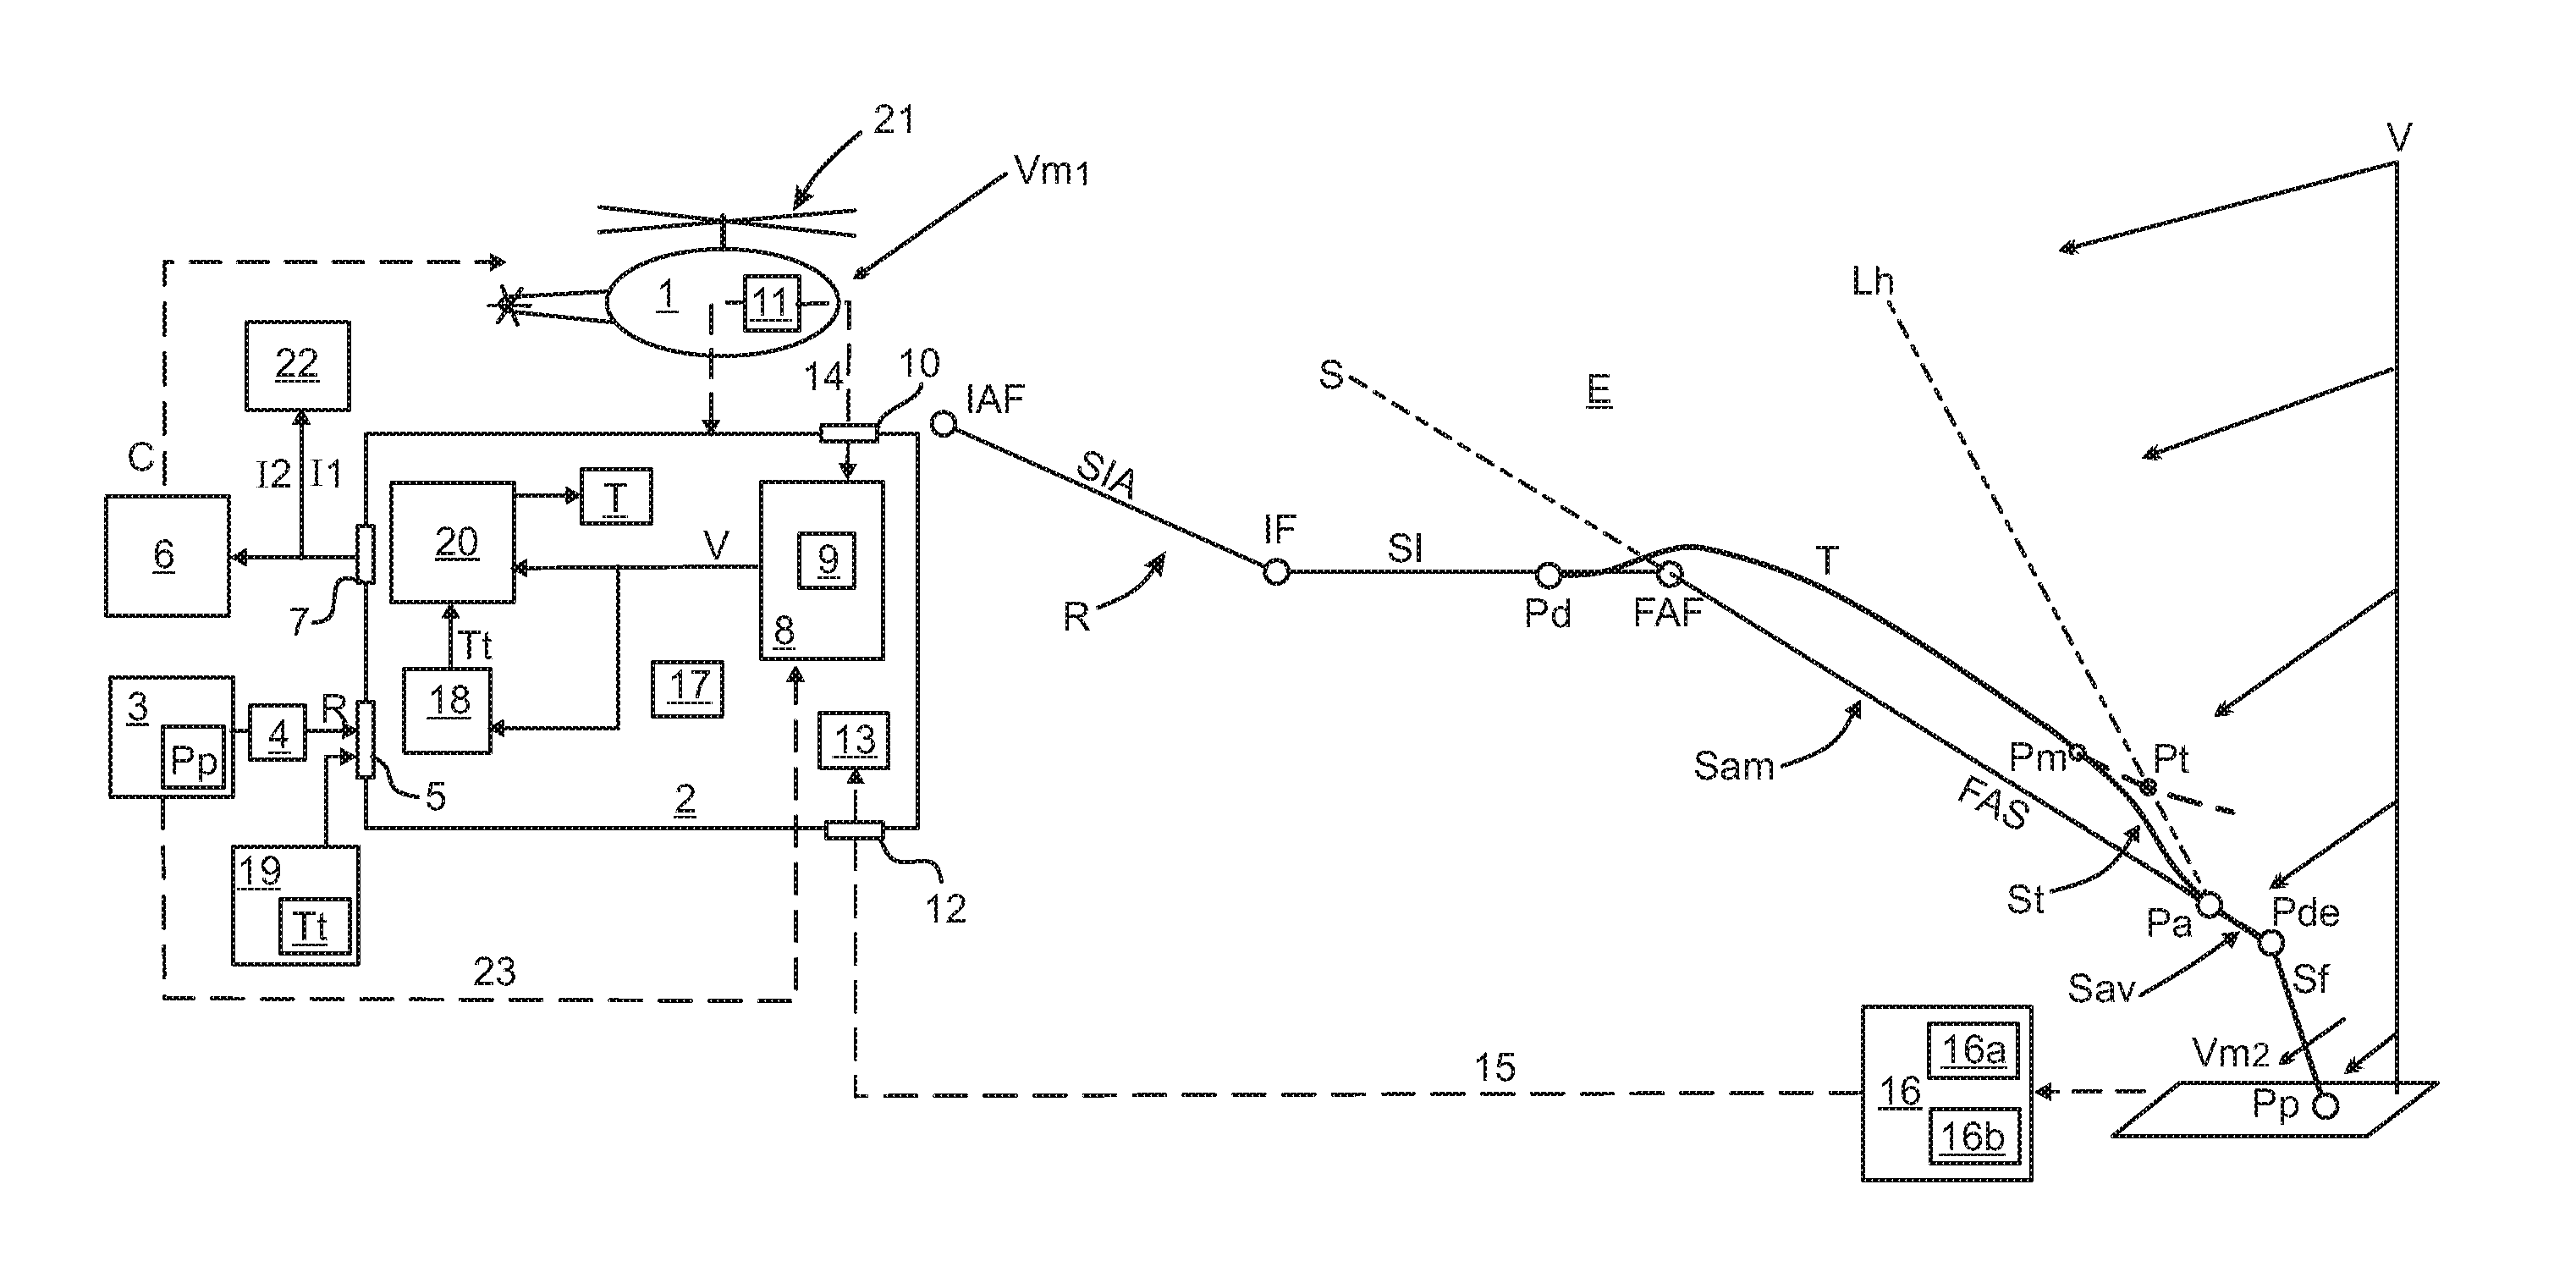 Method for the guidance of a rotorcraft, which method limits noise discomfort in a procedure for the approach to a landing point